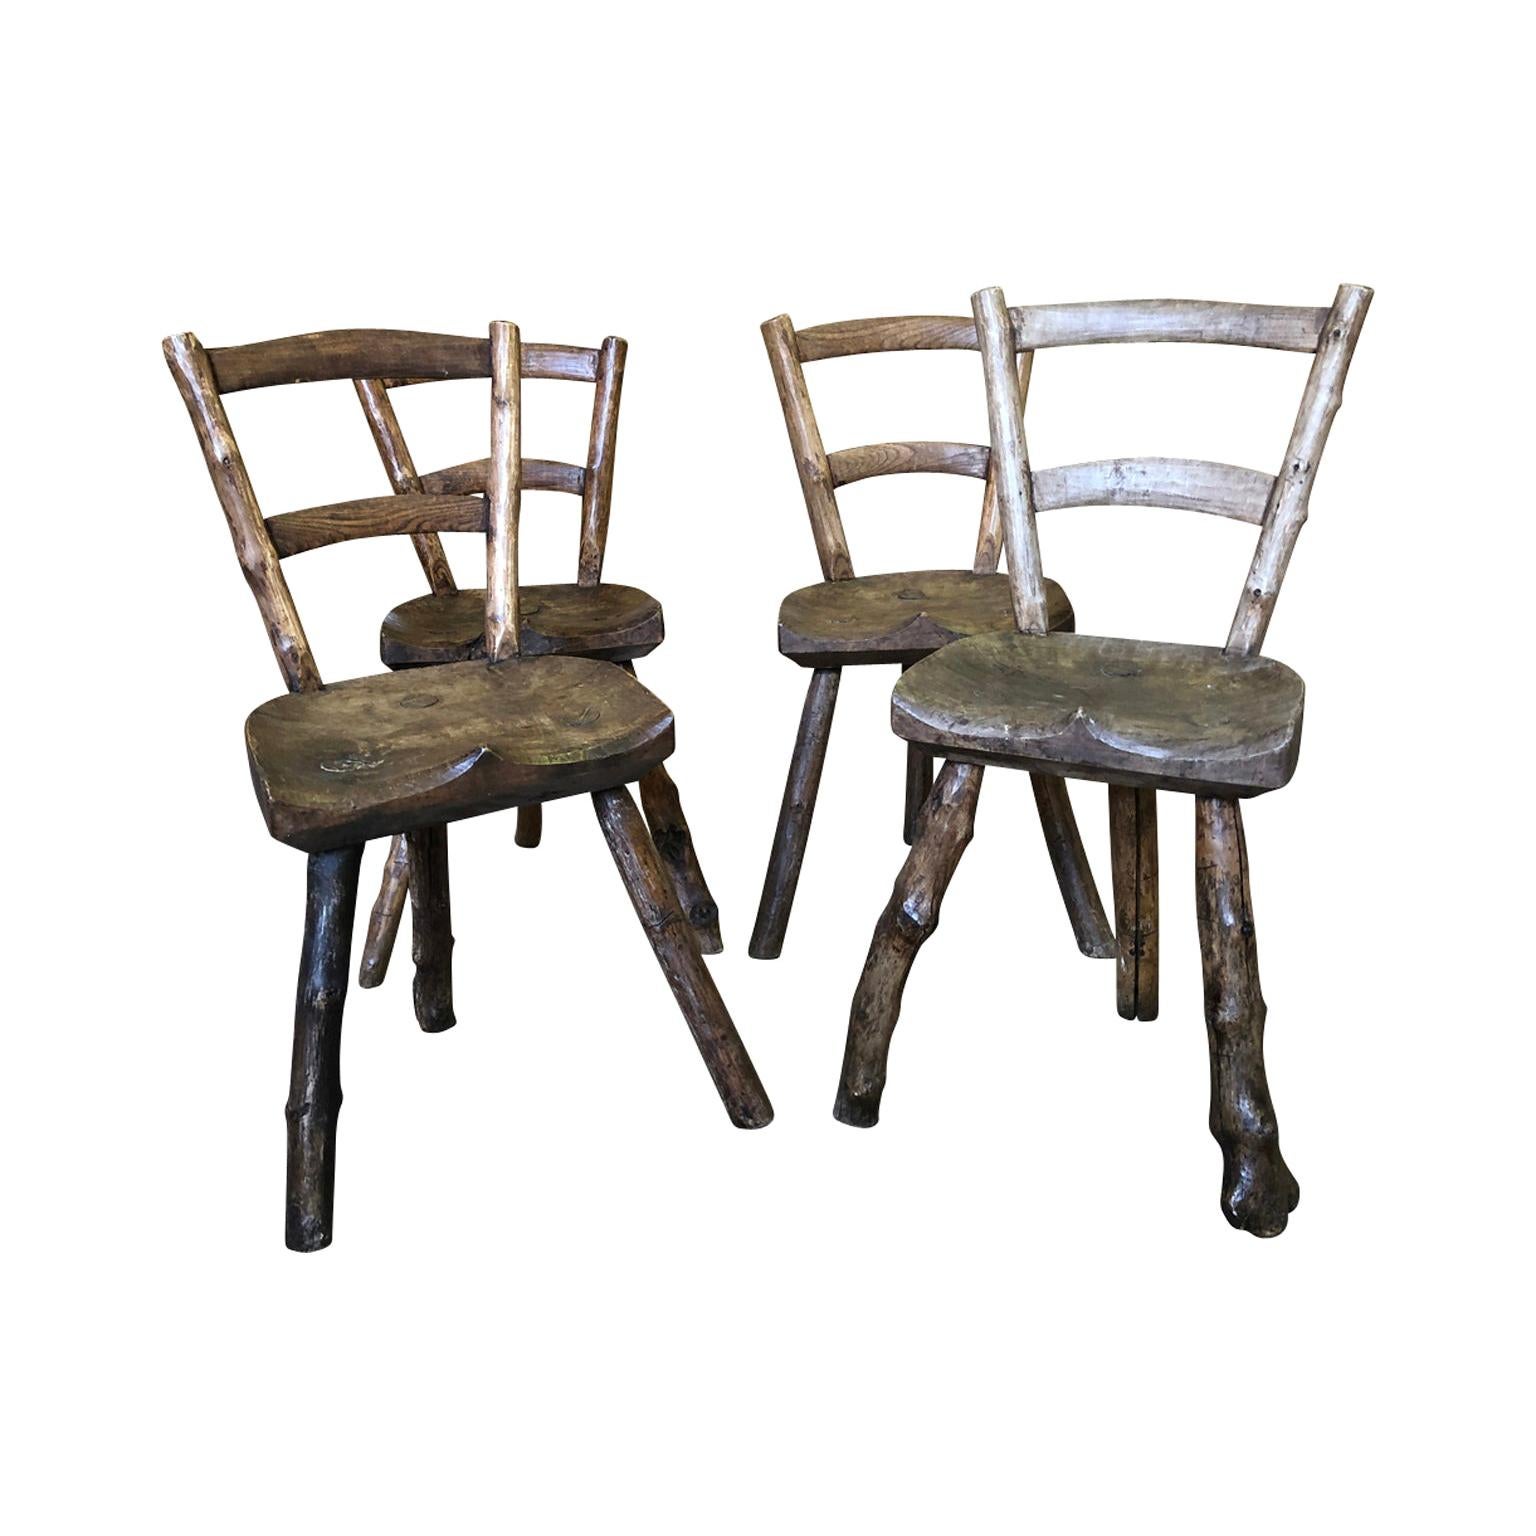 French Early 19th Century Set of 4 Primitive Chairs